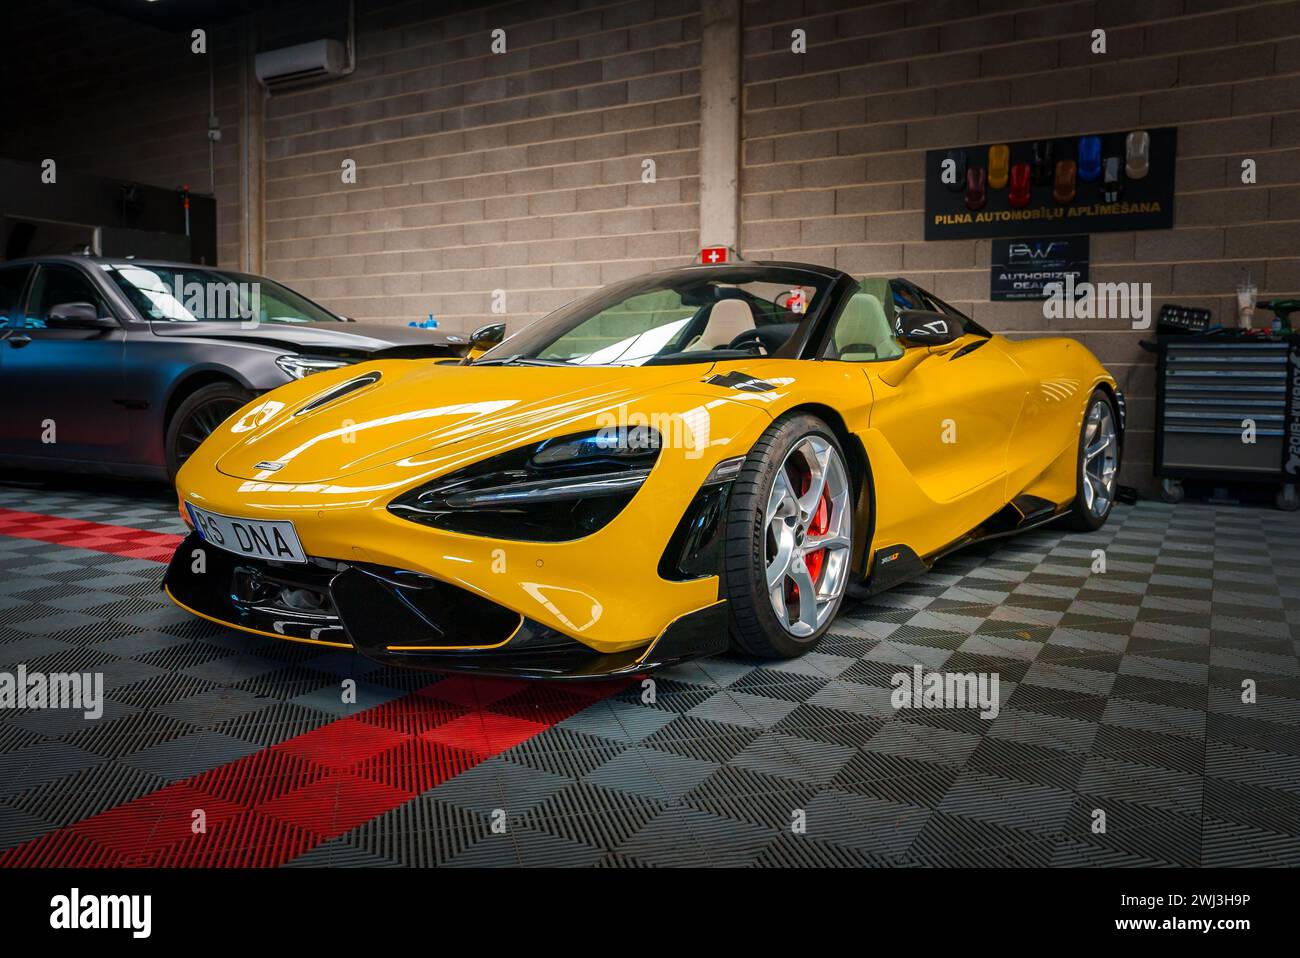 Yellow McLaren 765LT parked inside a Tuning Garage, on a Checkered Floor. Stock Photo